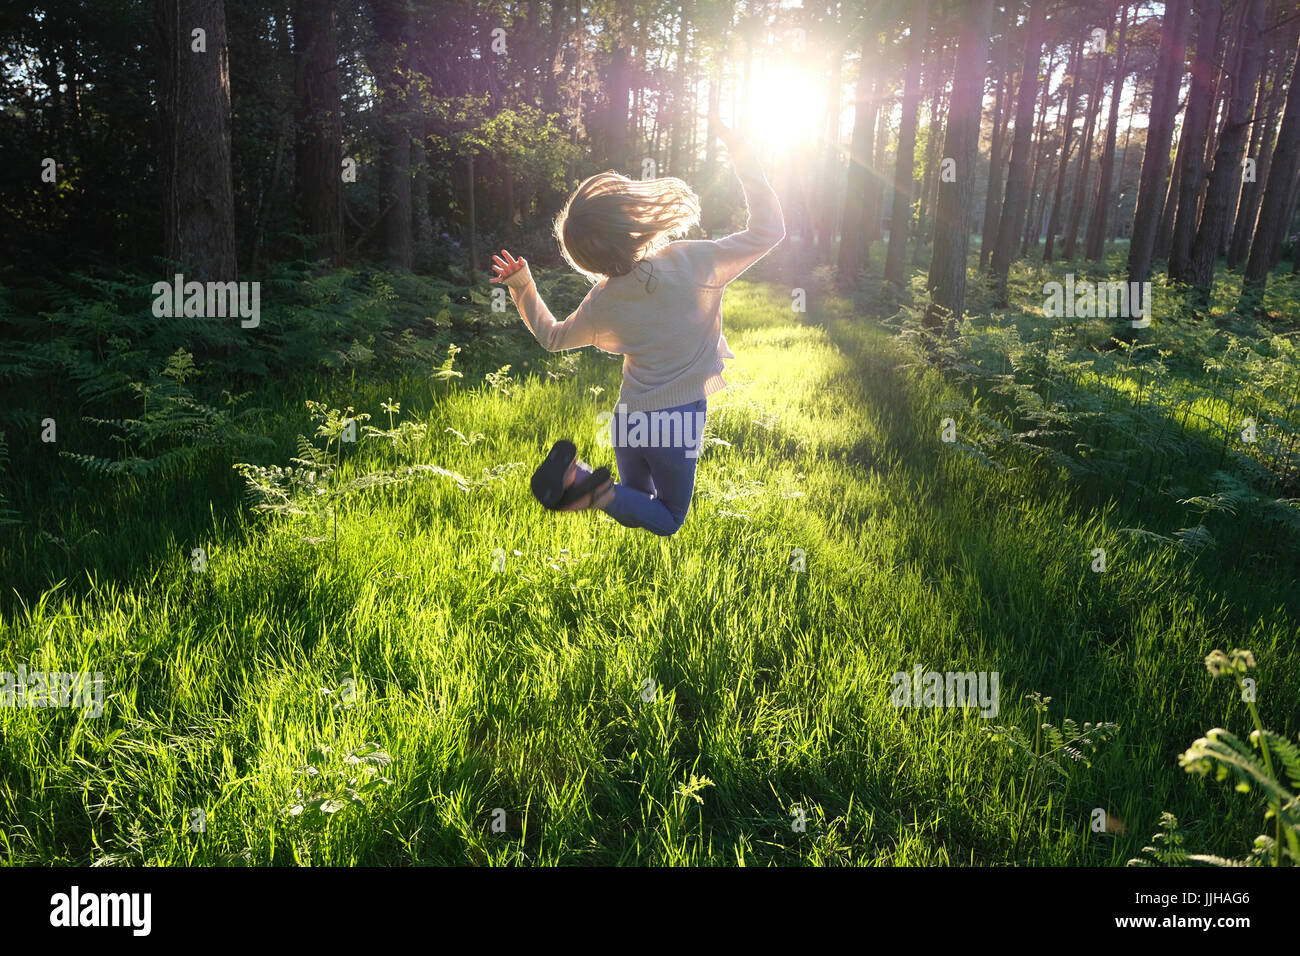 A young girl jumping for joy in a sunlit forest. Stock Photo